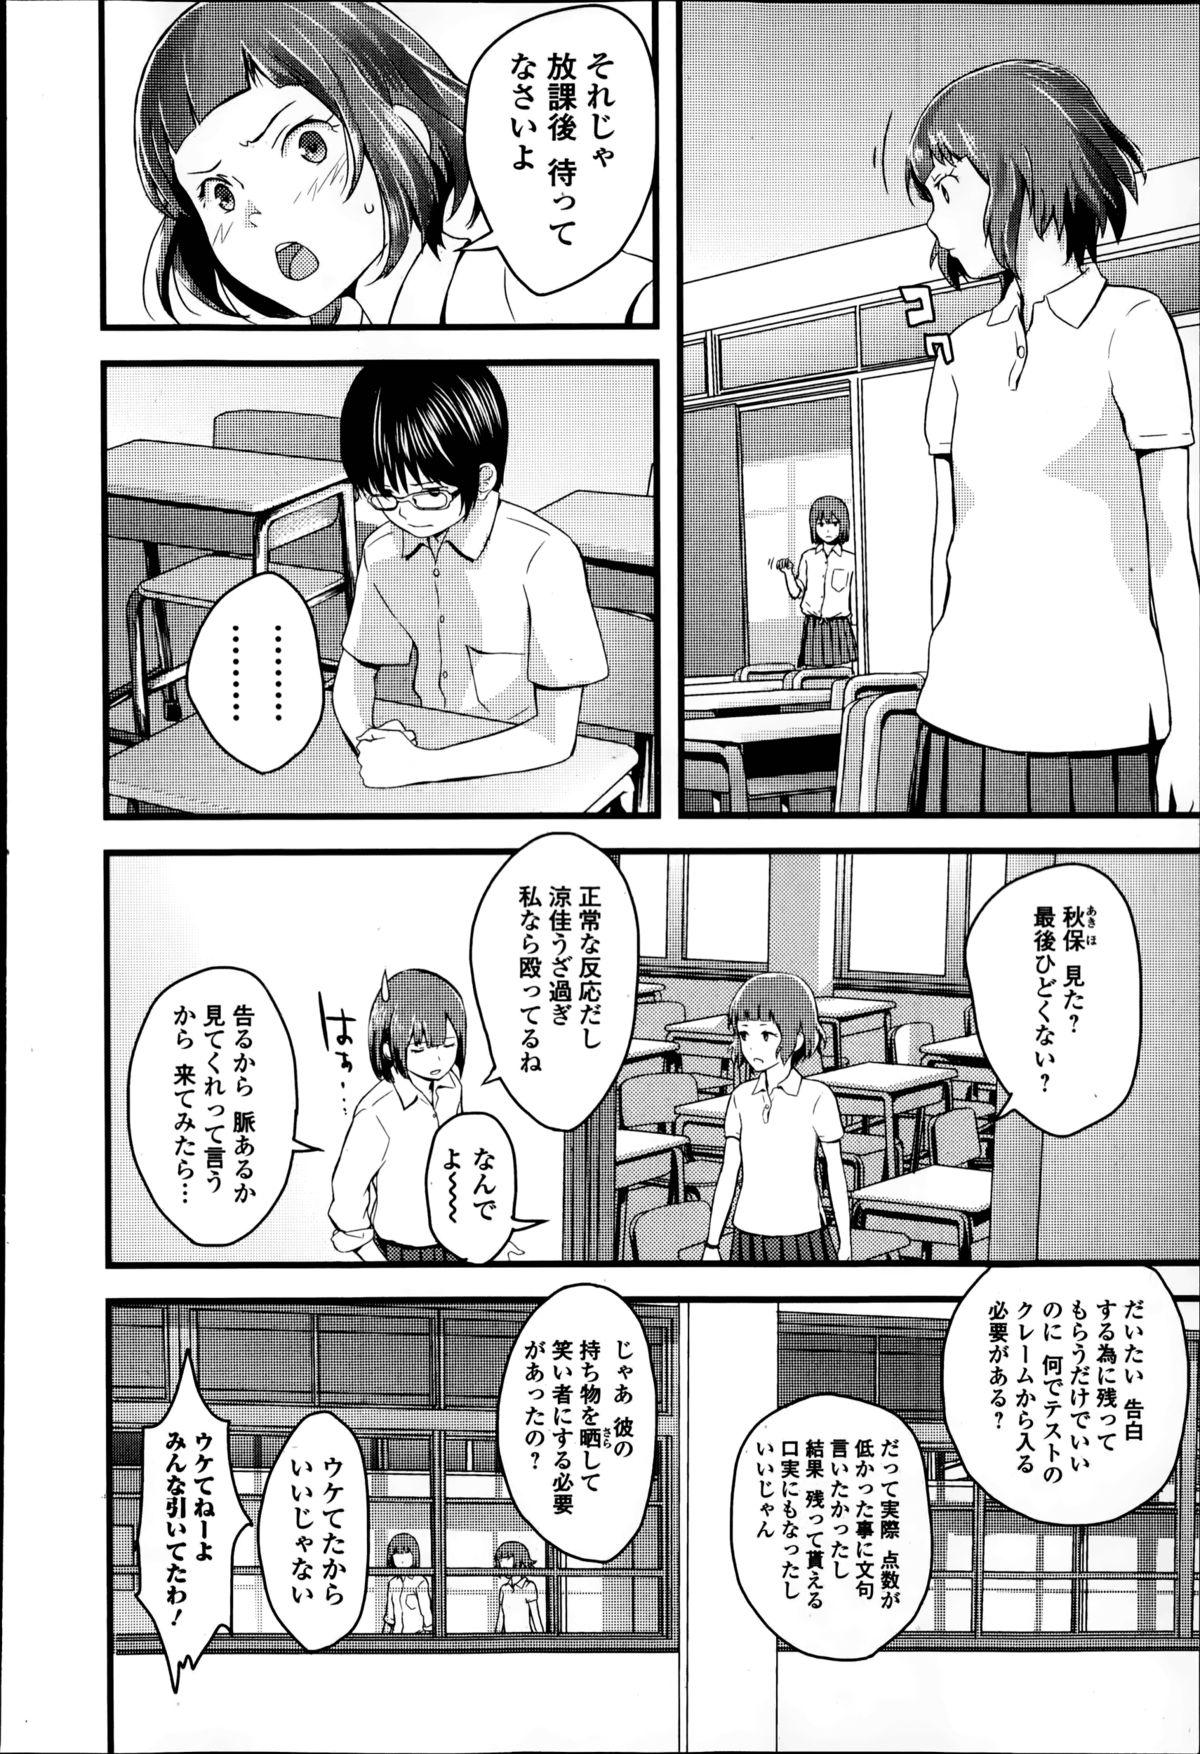 Otome the Virus Ch. 1-2 5